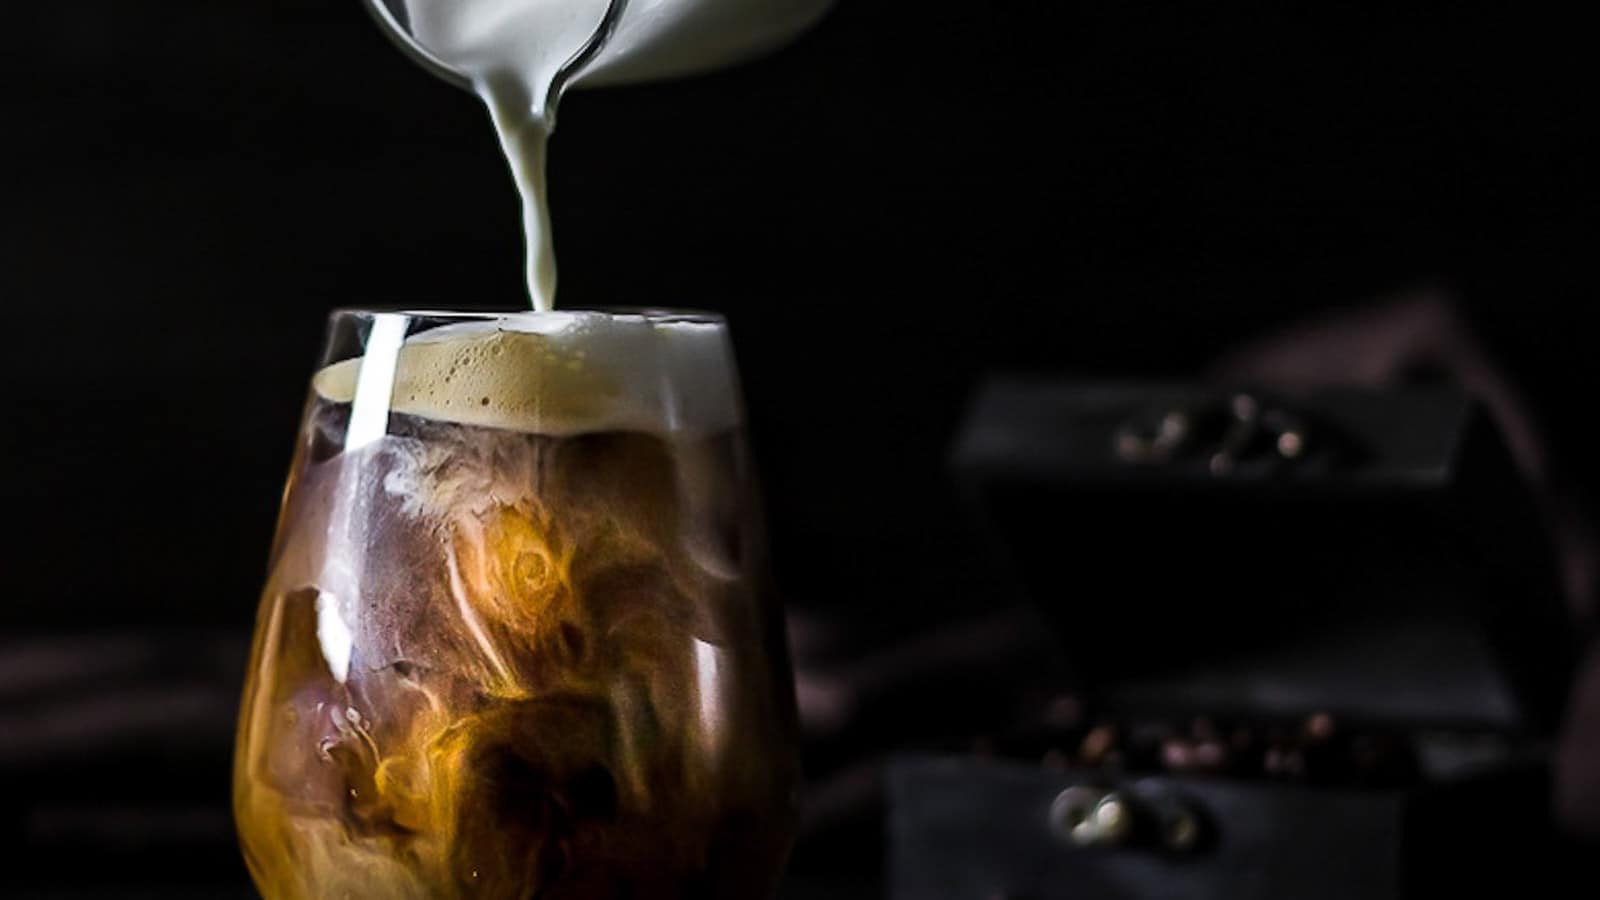 Milk being poured into a glass of Cold Brew Coffee.